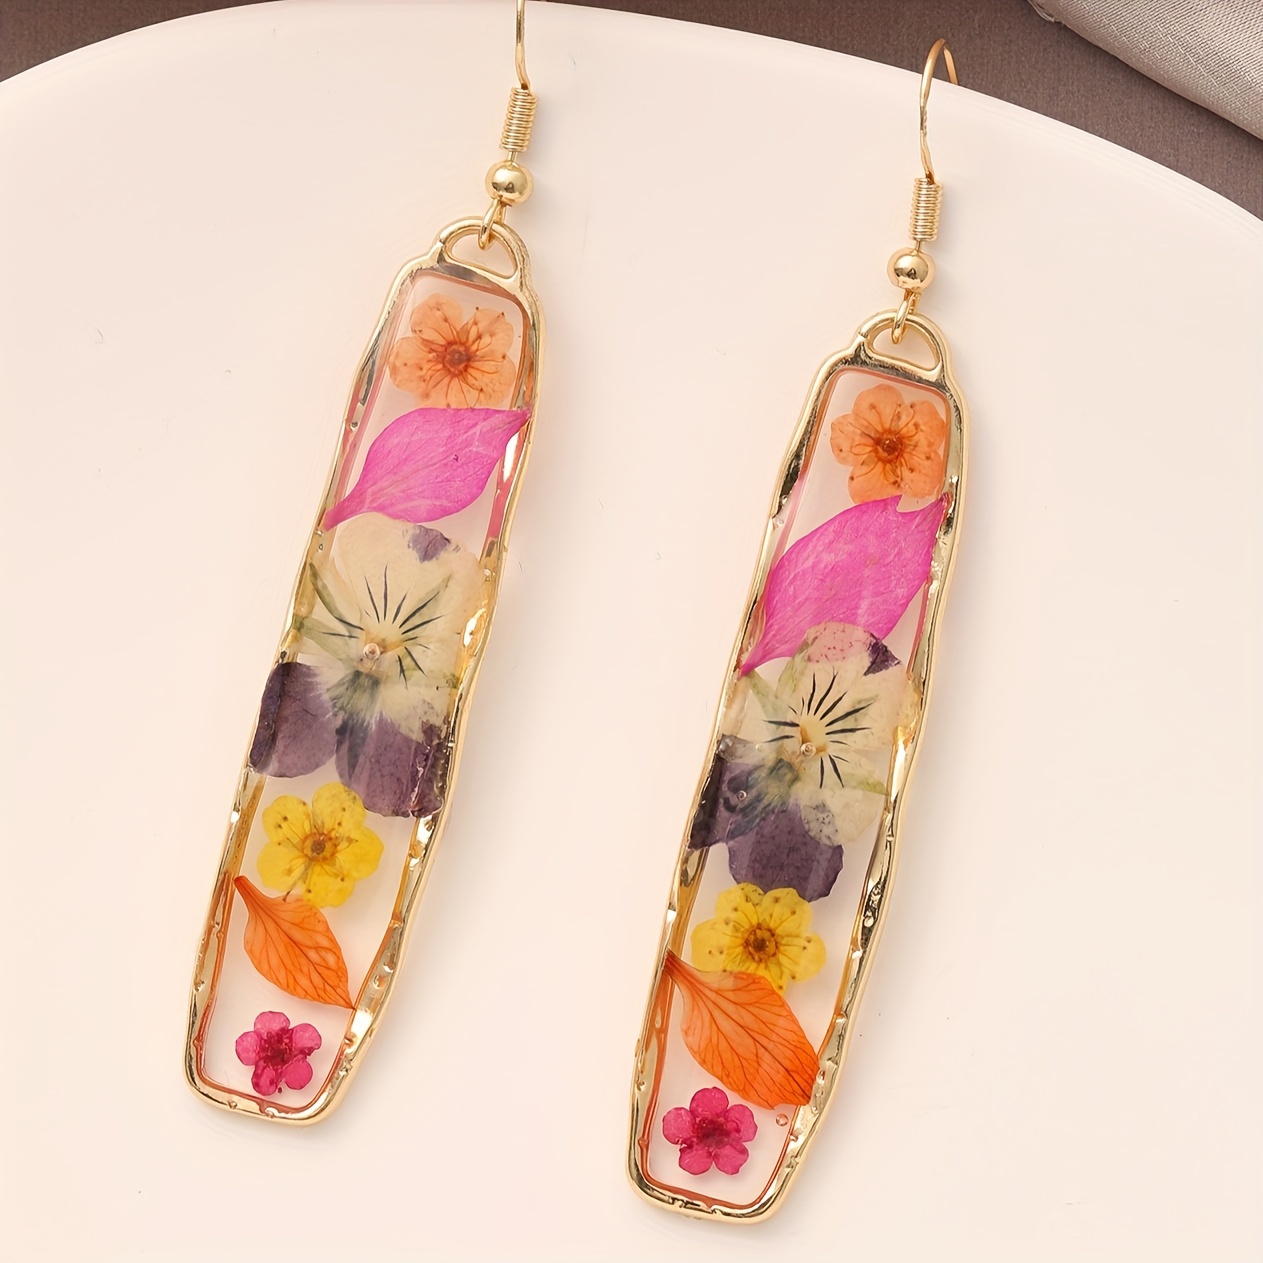 

Vintage-inspired Long Dried Flower Drop Earrings For Women - Zinc Alloy With Copper Posts, Perfect For Everyday Wear & Special Occasions